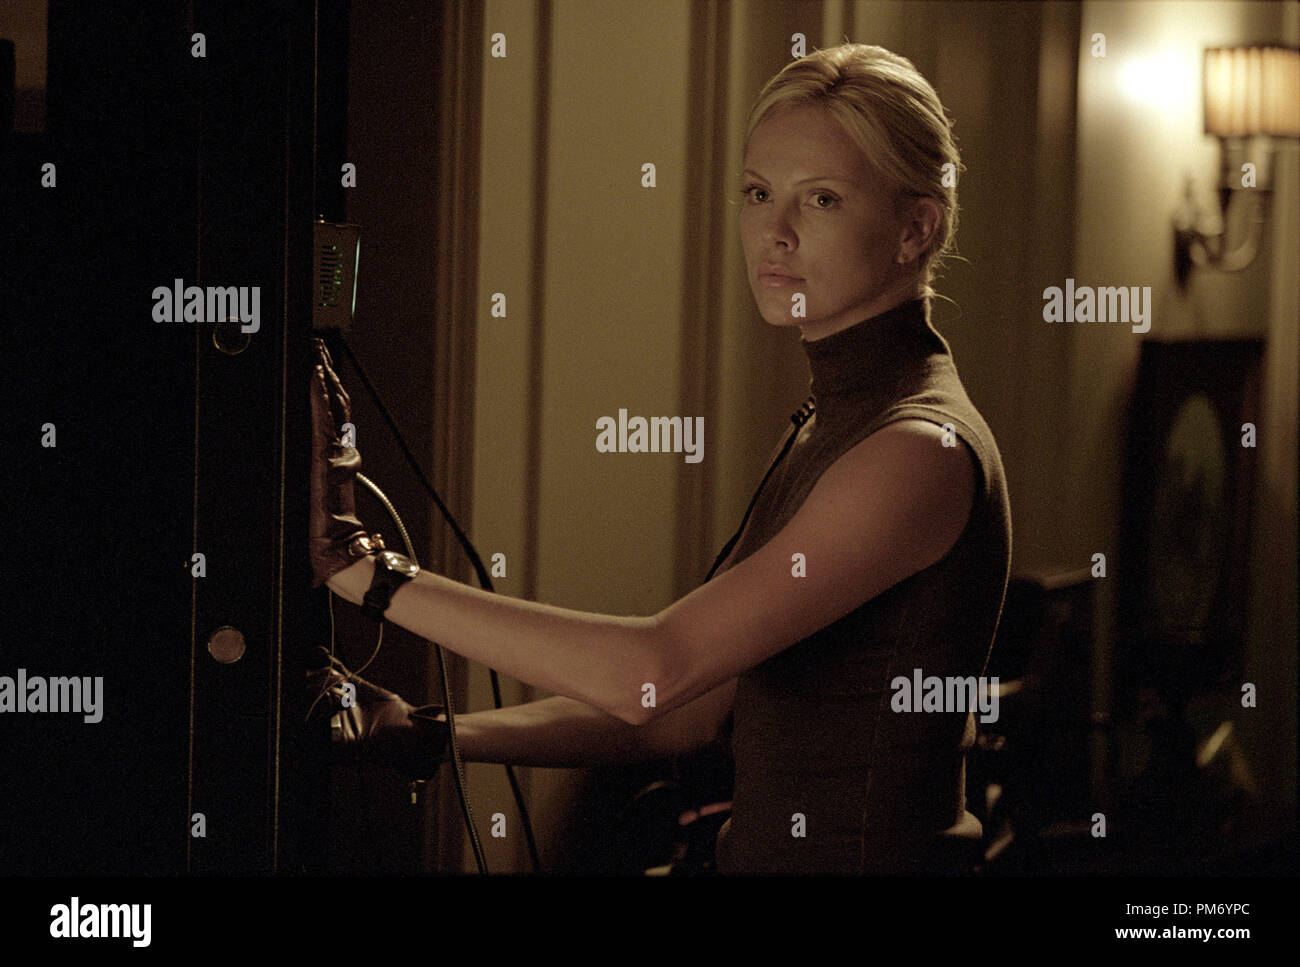 Studio Publicity Still from 'The Italian Job' Charlize Theron © 2003 Paramount Photo by Claudette Barius File Reference # 307531071THA  For Editorial Use Only -  All Rights Reserved Stock Photo